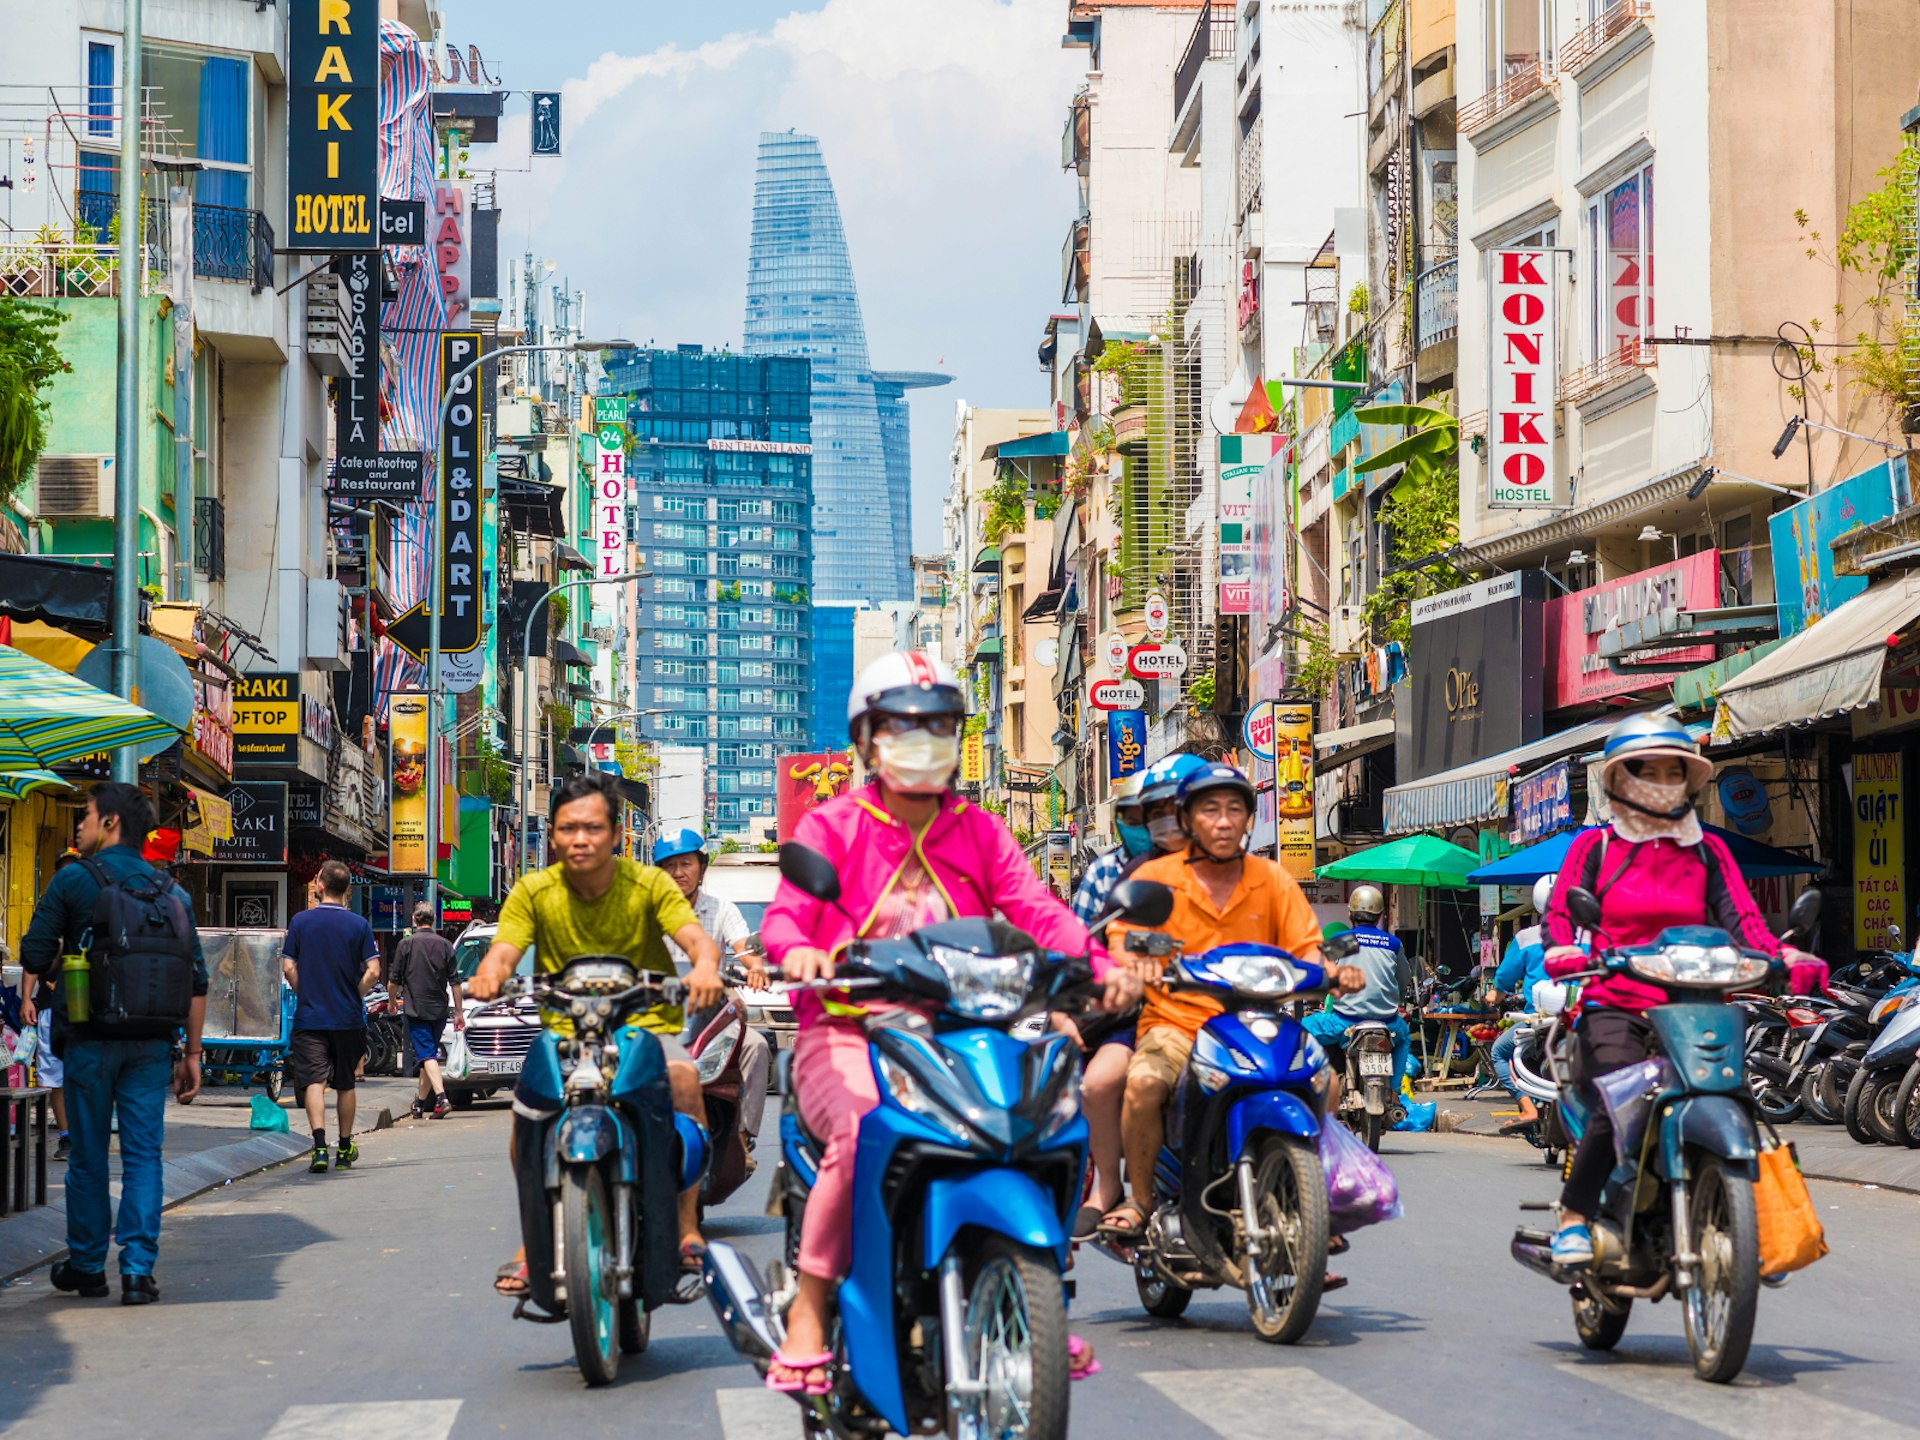 Moped users riding down the streets of Hi Chi Minh City, Vietnam